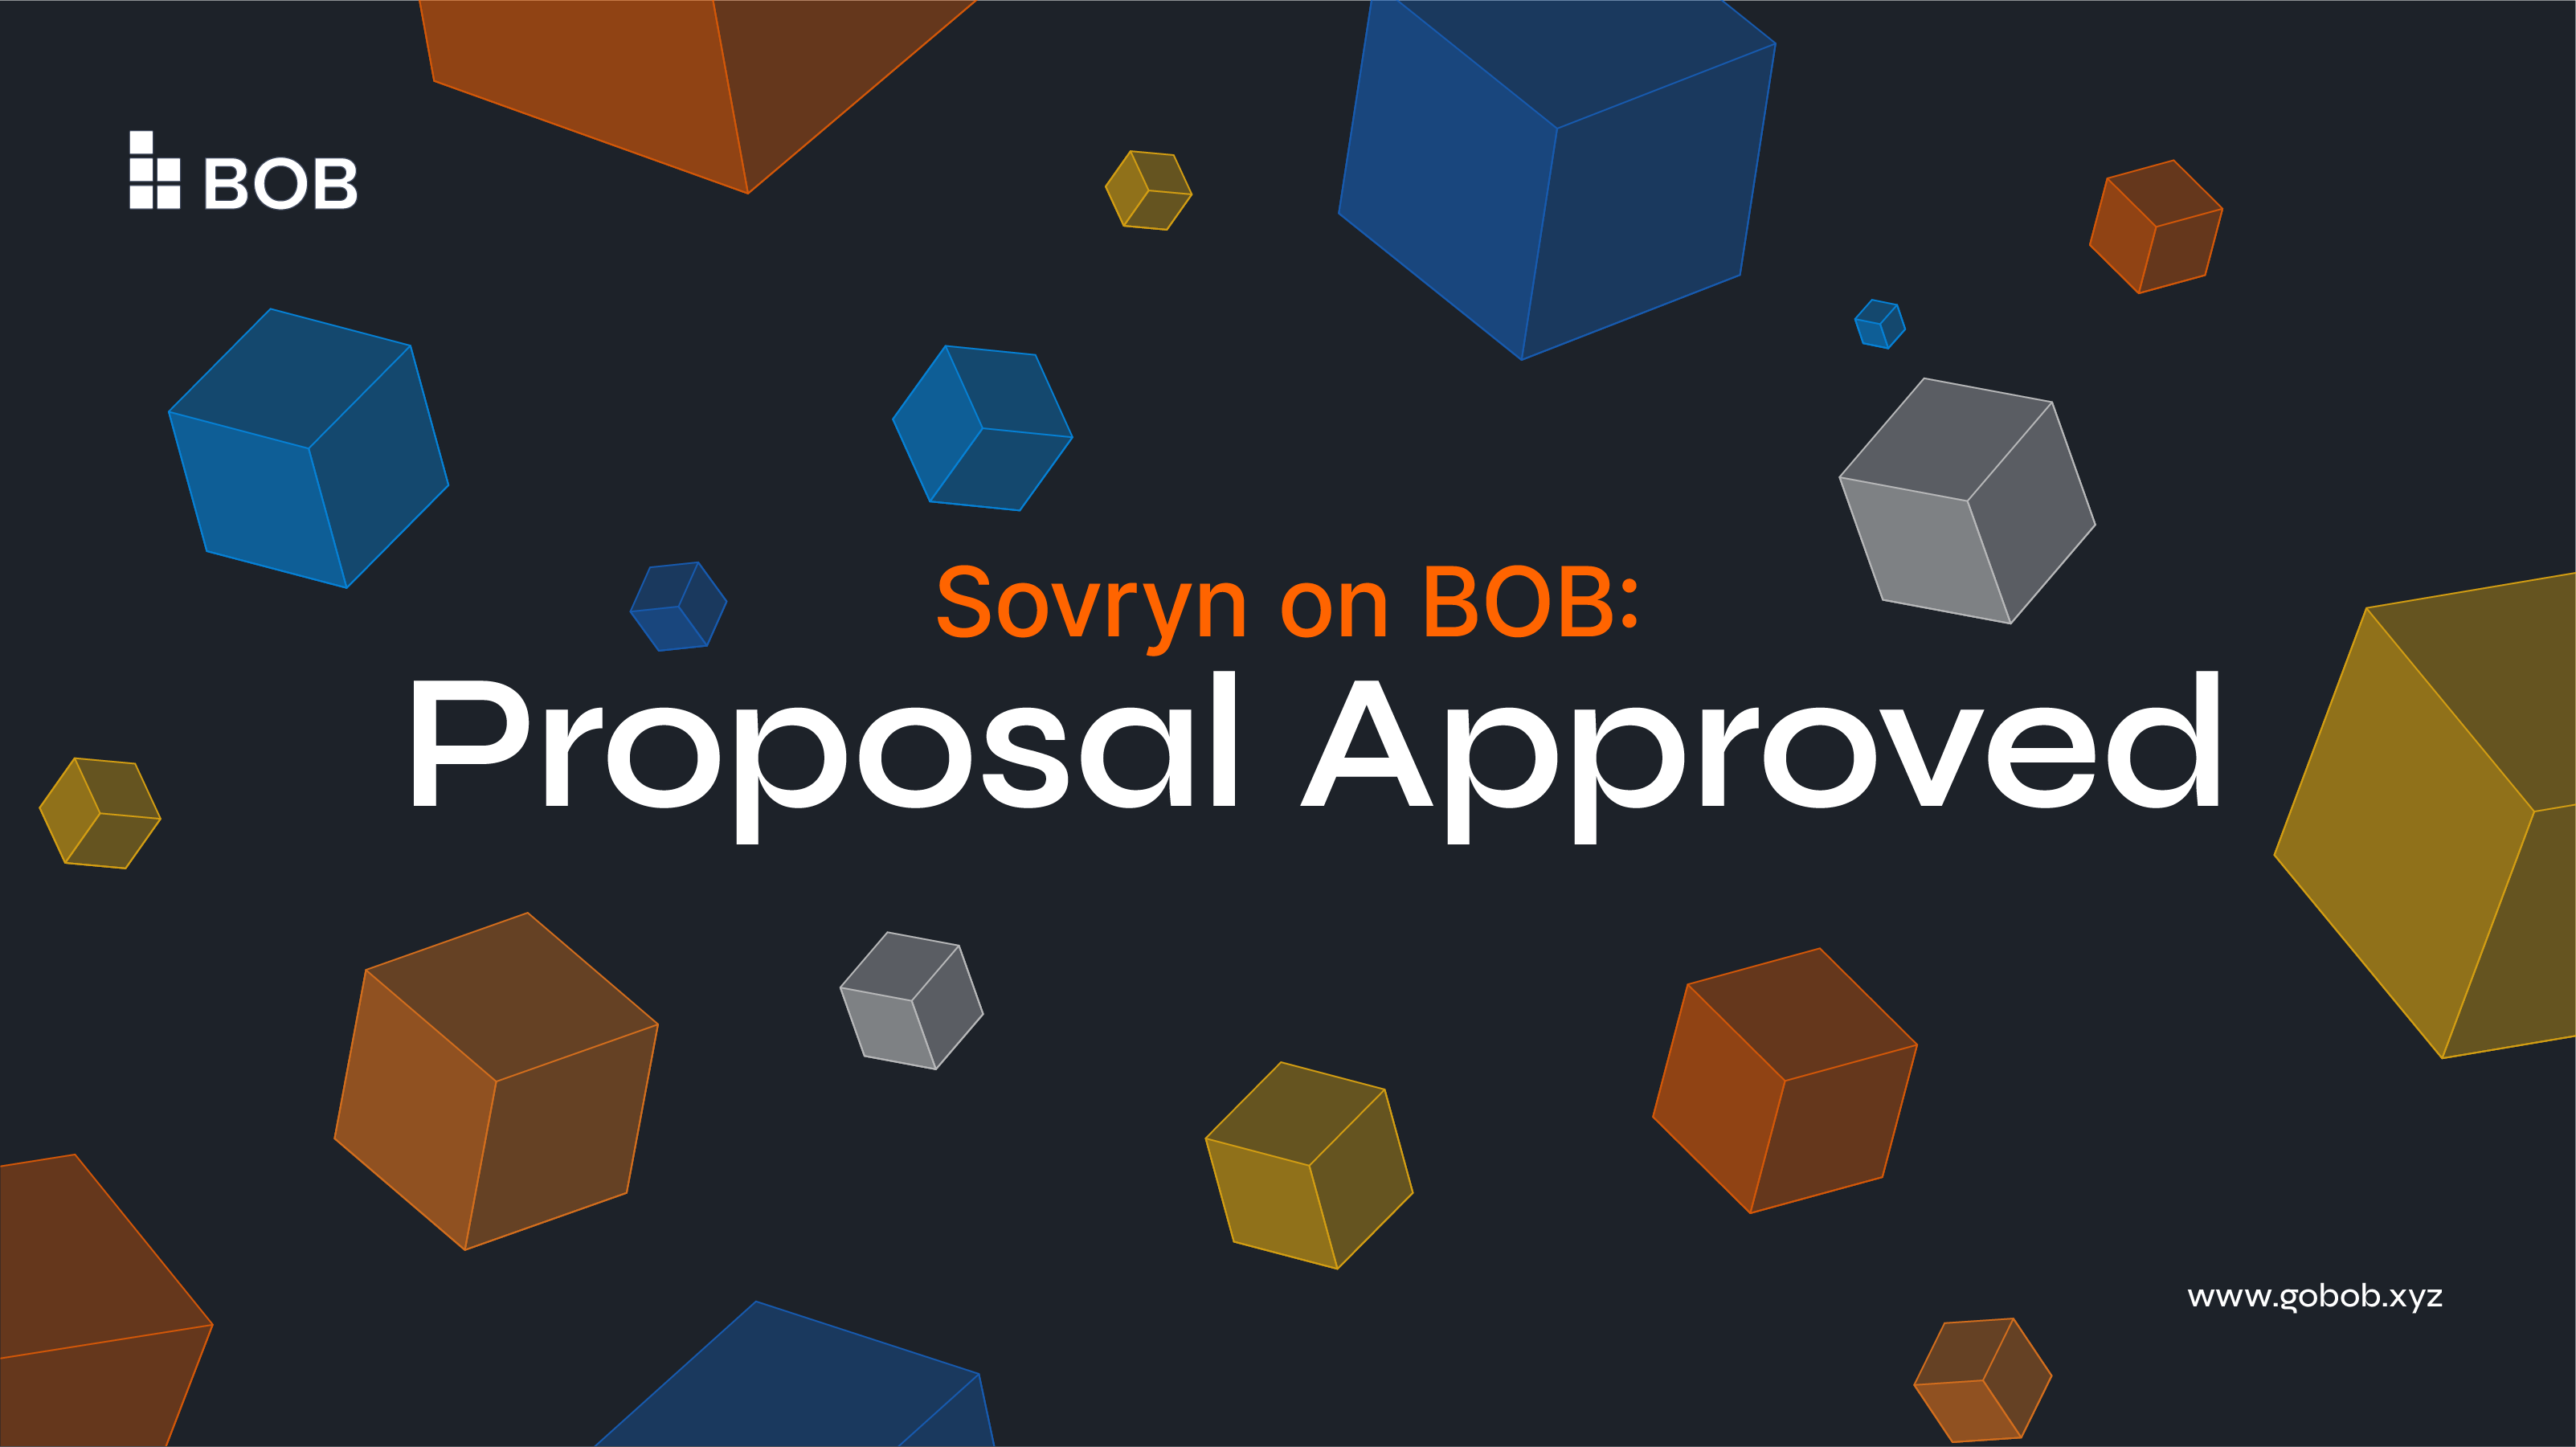 https://api.blockchainwire.io/uploads/TransformGroup/release_file/SOV_BOB_Proposal_Accepted1.png